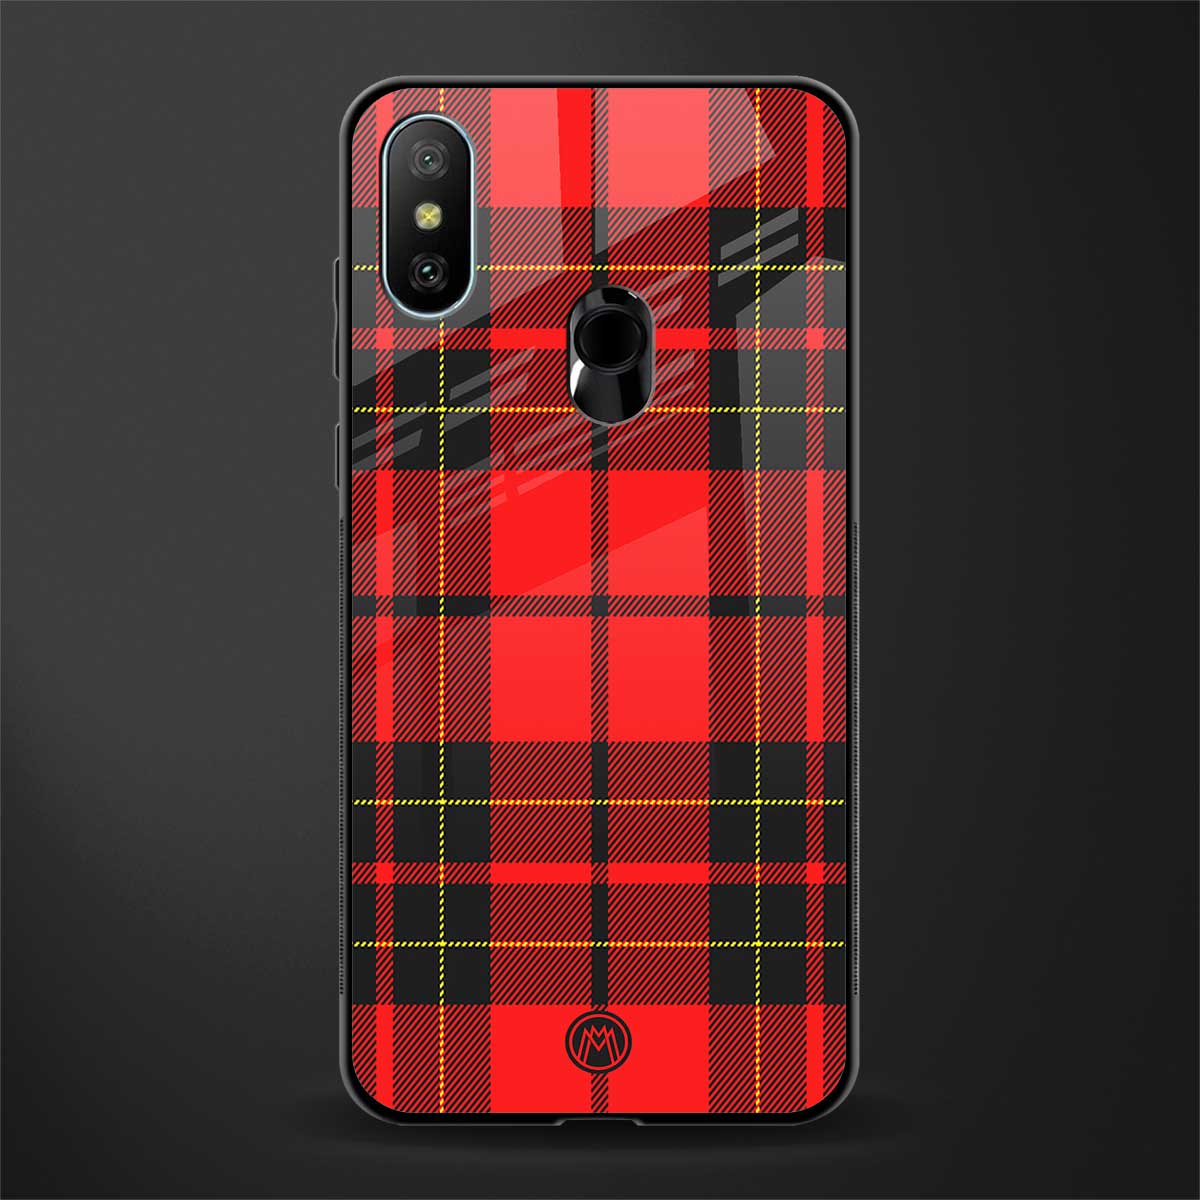 cozy red sweater glass case for redmi 6 pro image